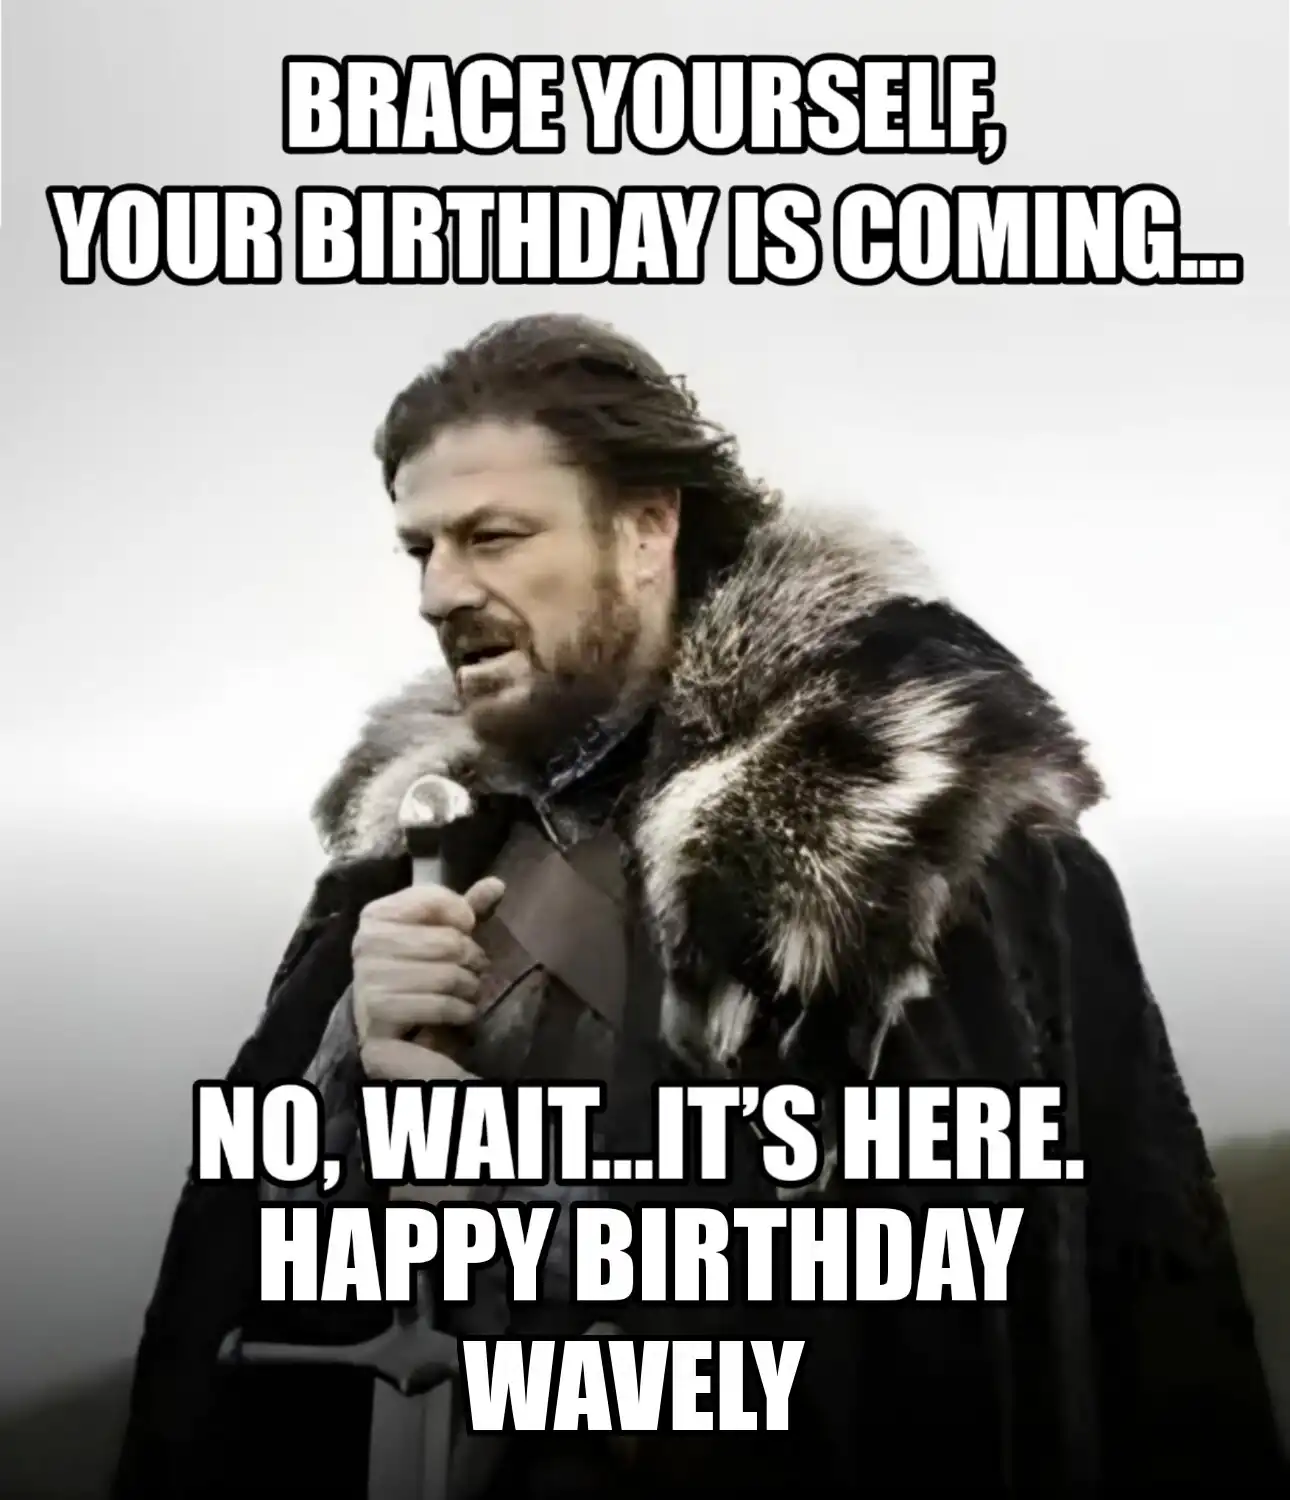 Happy Birthday Wavely Brace Yourself Your Birthday Is Coming Meme